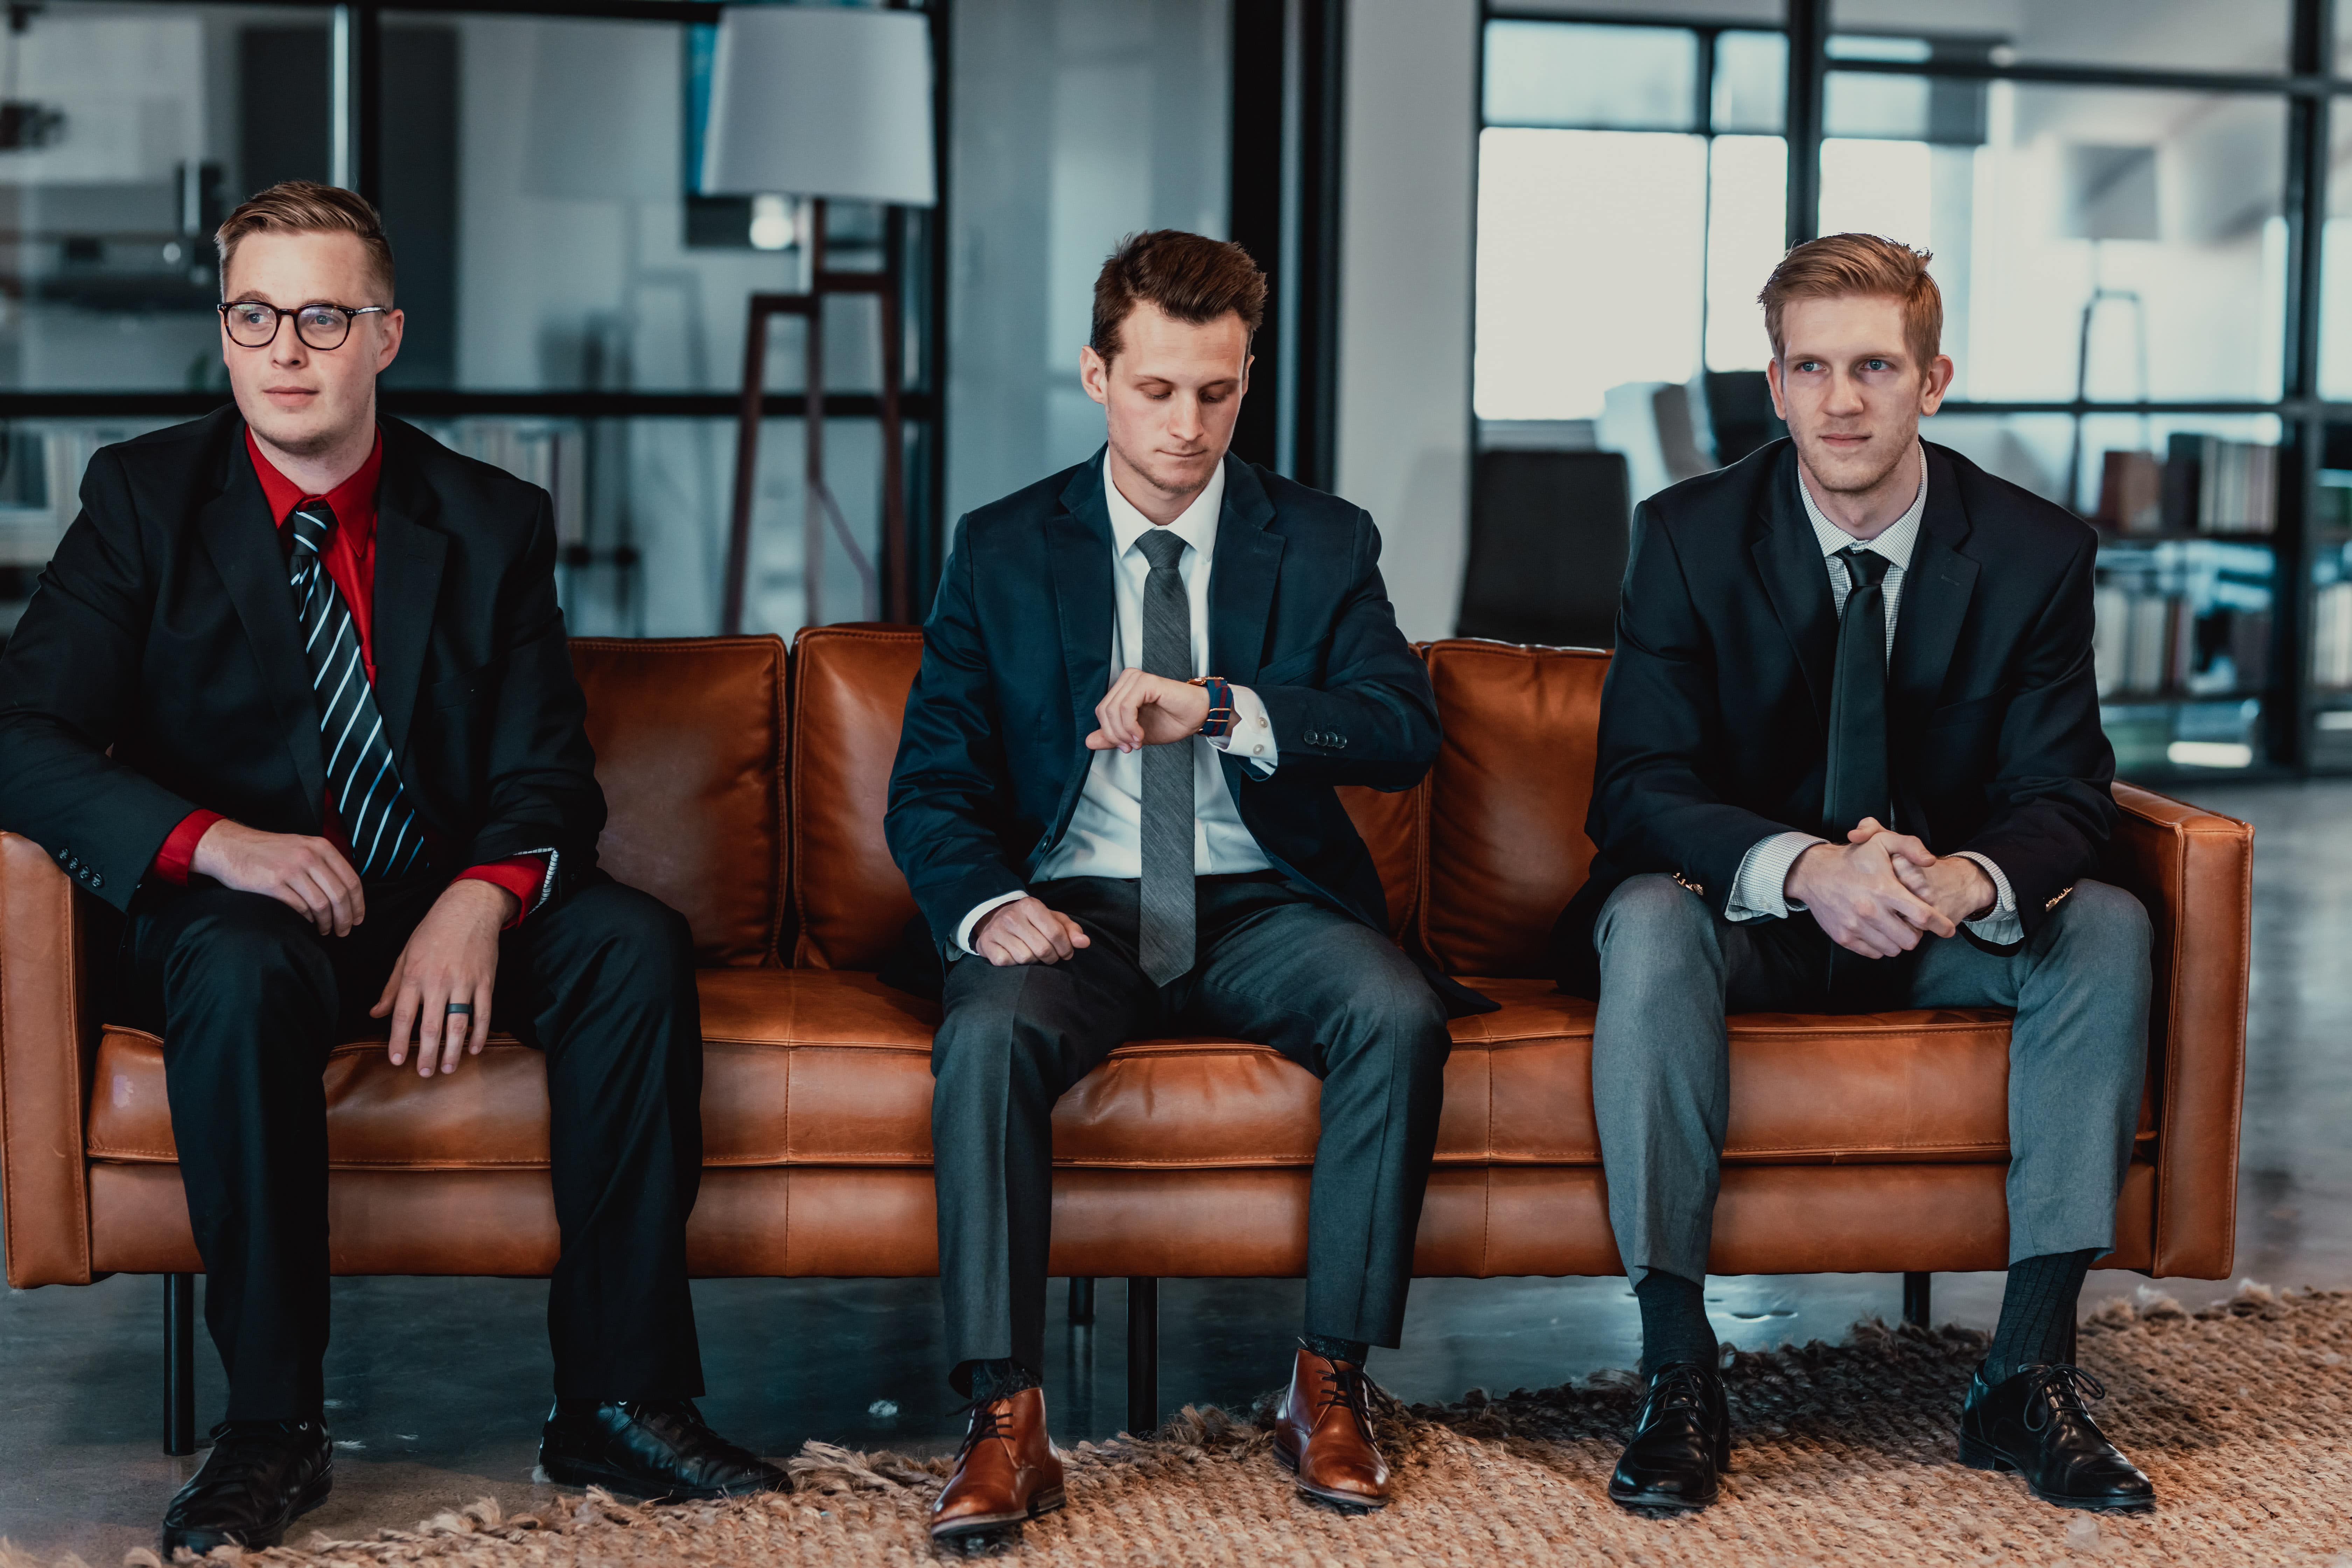 Glass Cases sitting on a couch in business attire